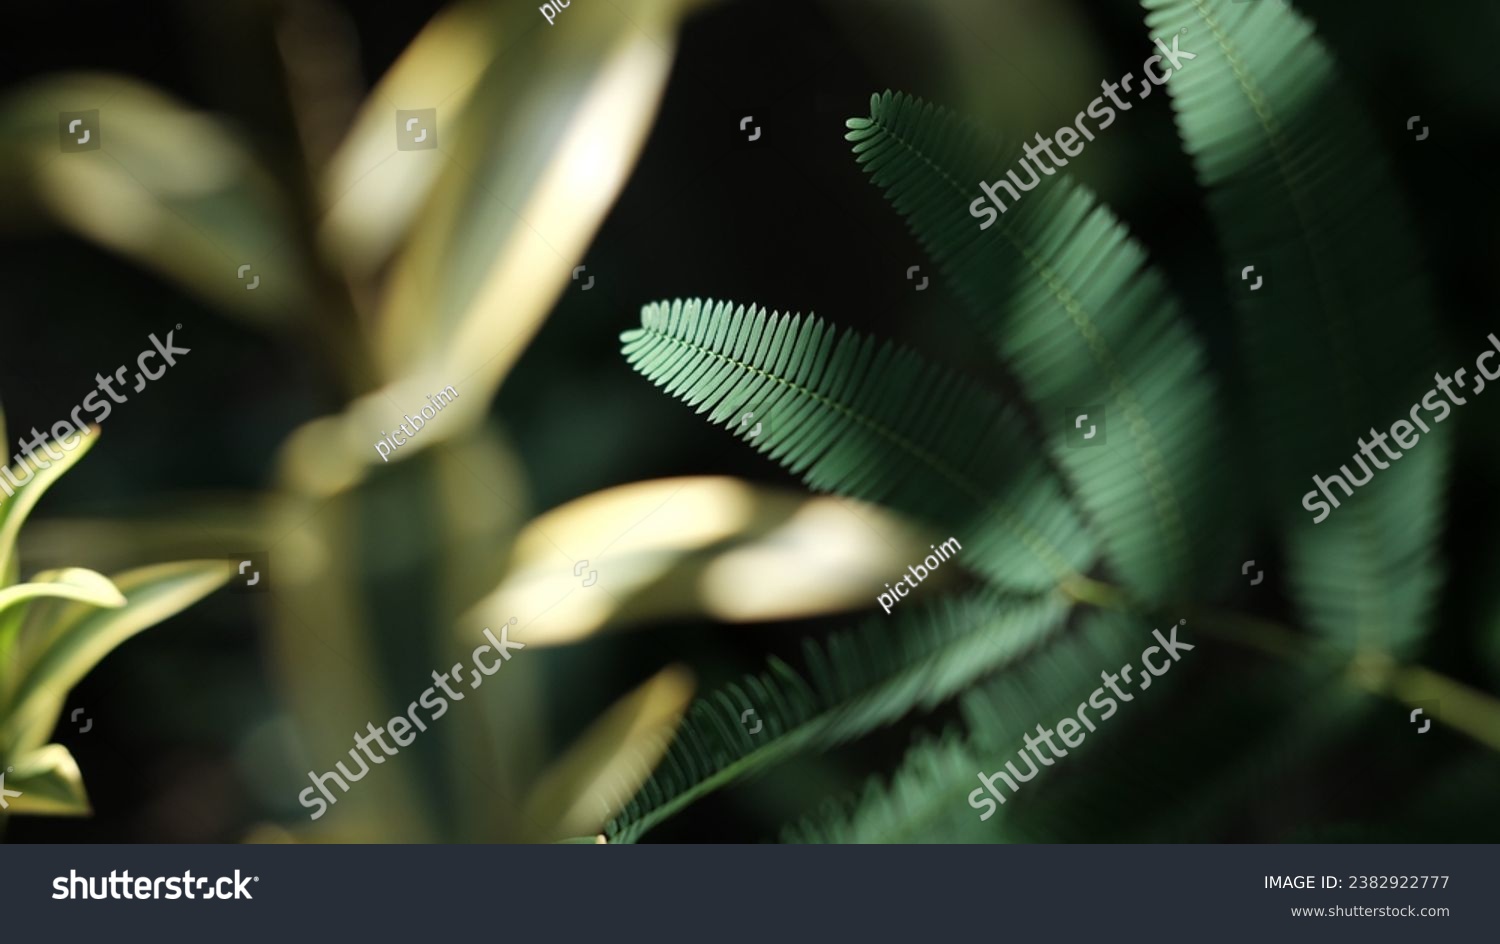 Abstract leaves, the vibrant green leaves stand out against a soft, blurred background, creating a sense of depth and mystery #2382922777